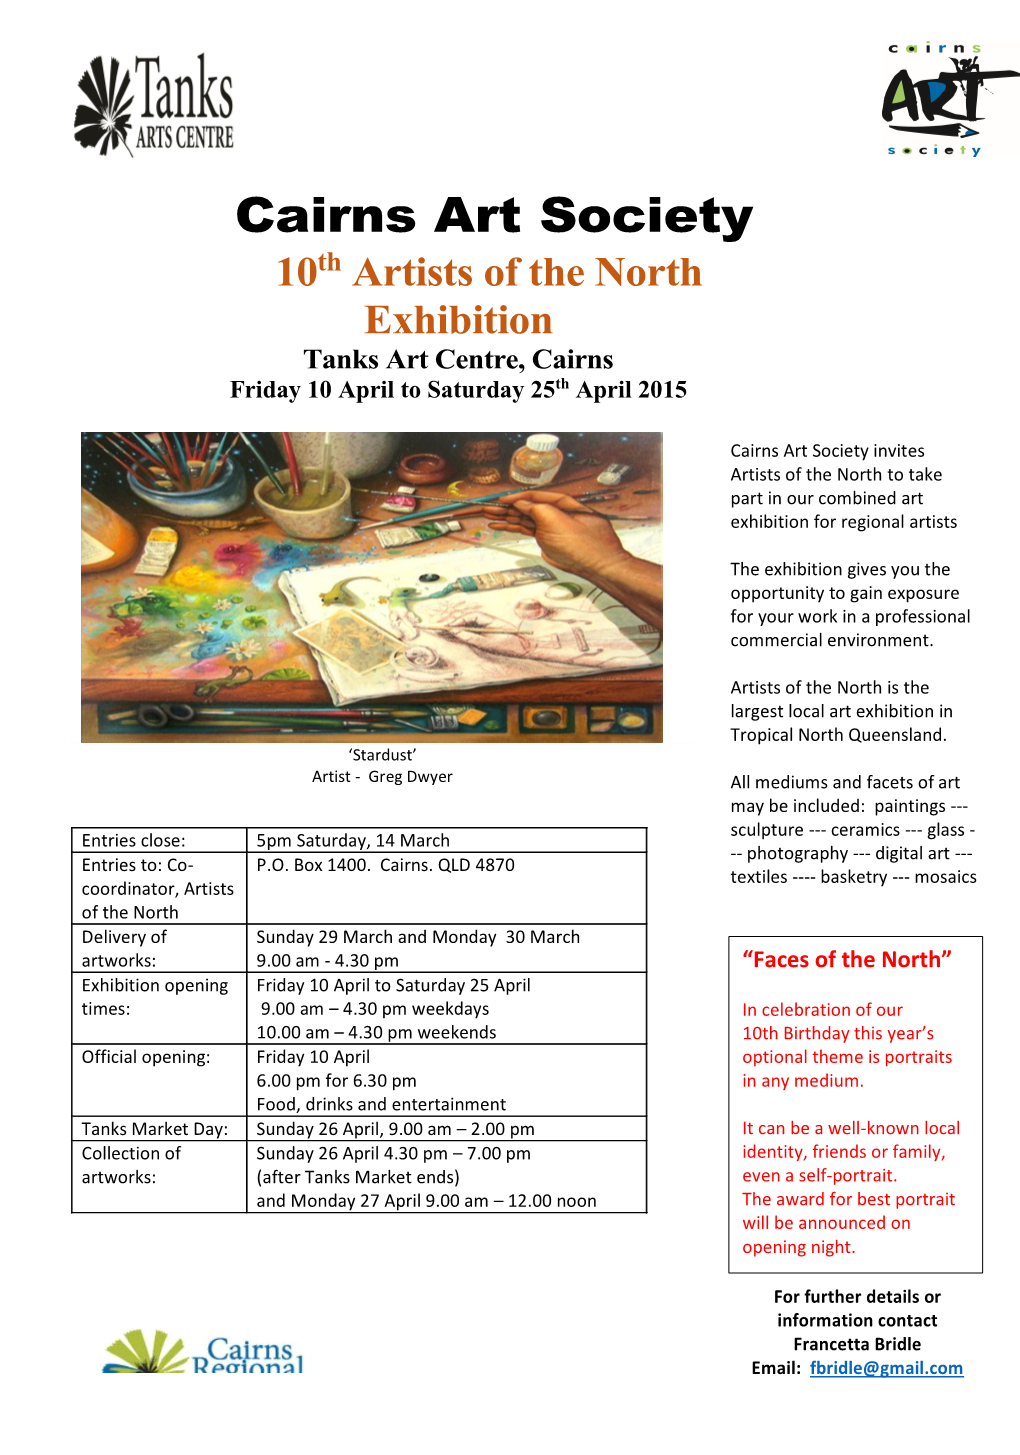 10Th Artists of the North Exhibition, 10-25 April, 2015